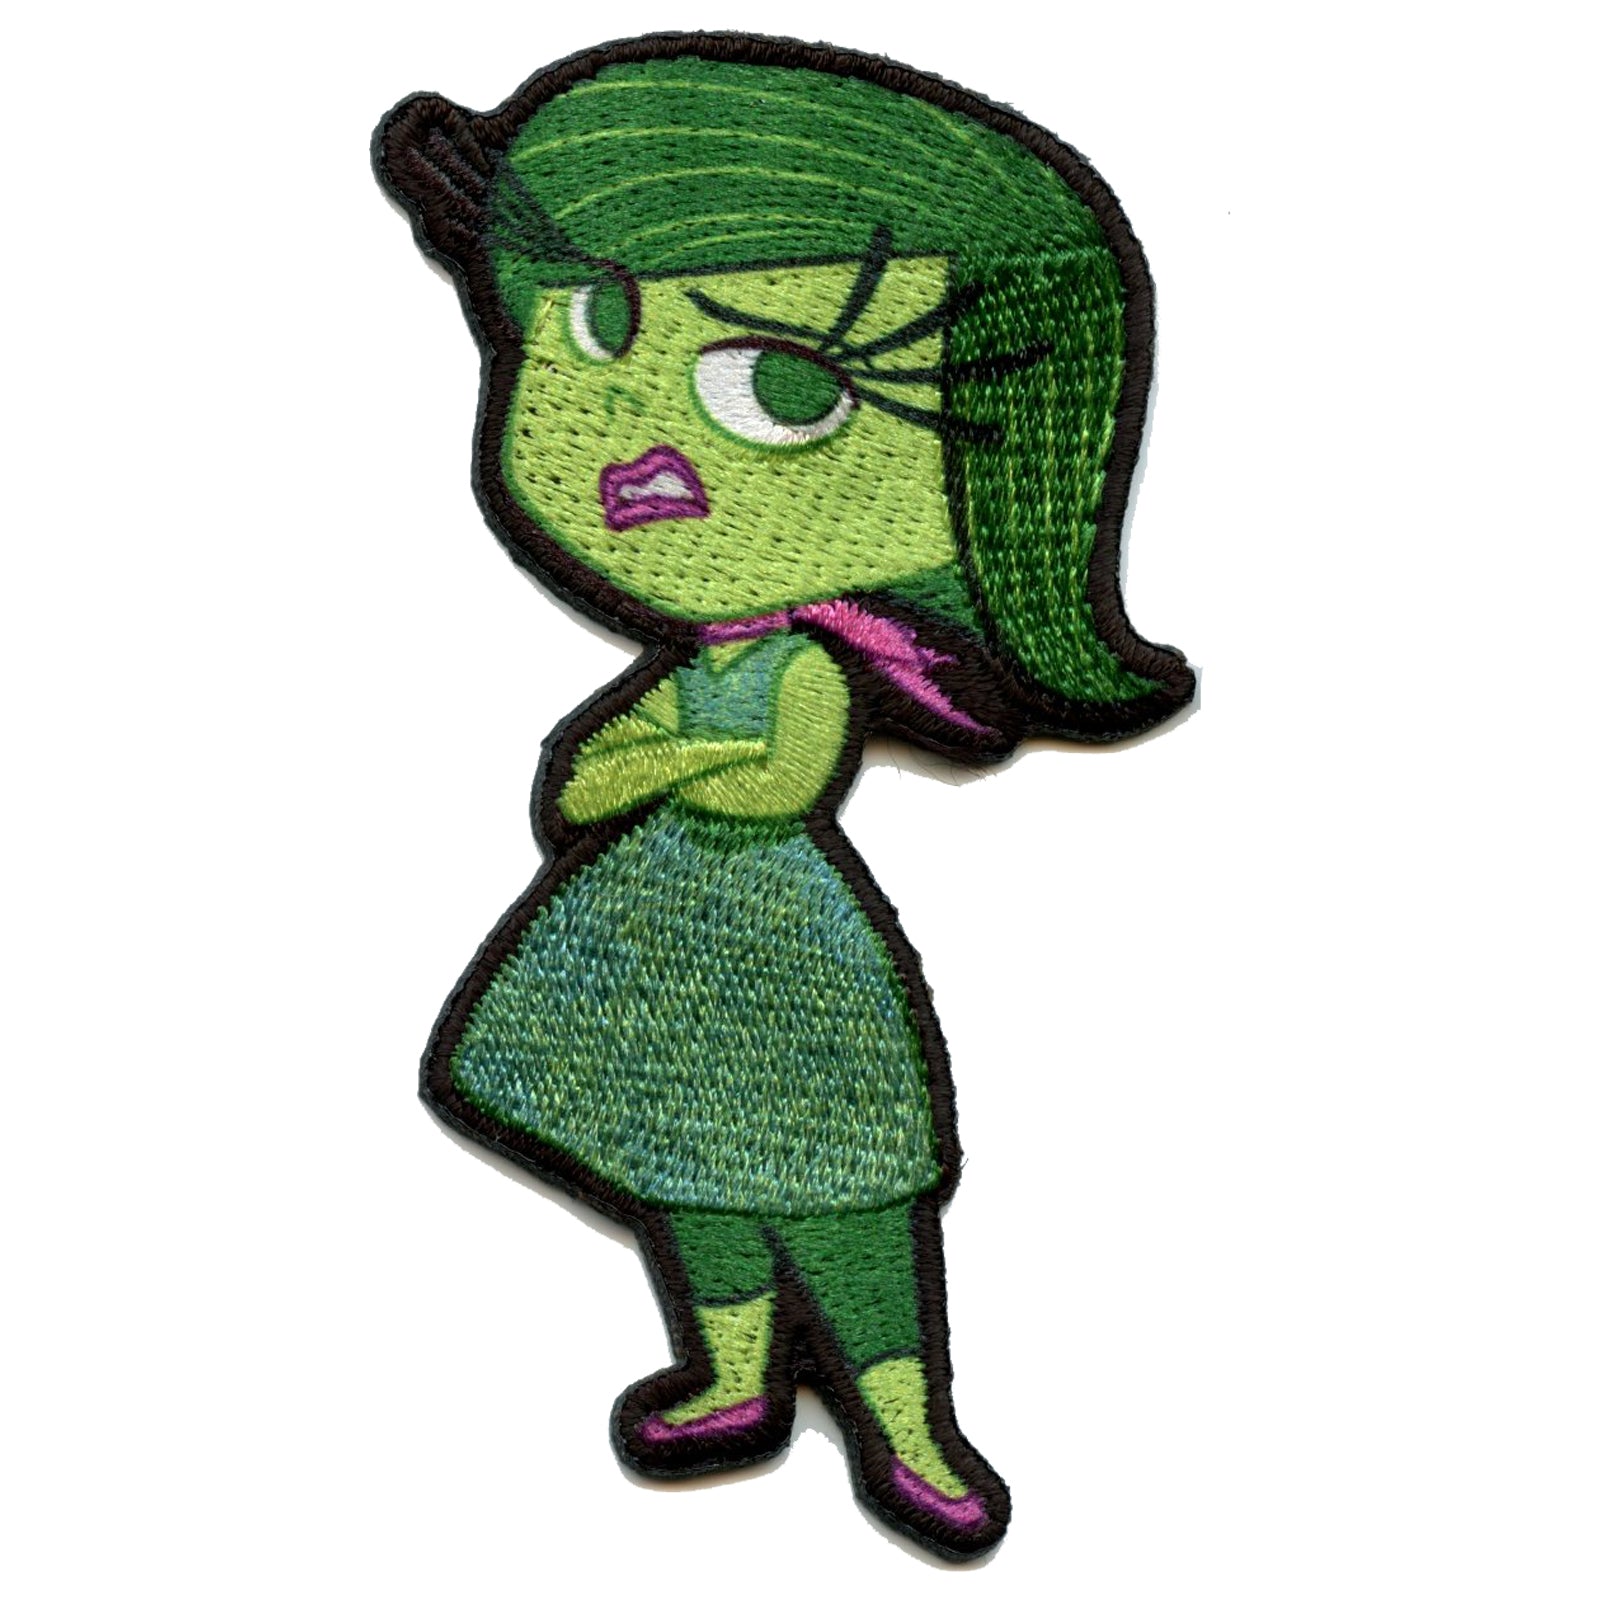 Official Disney's Inside Out Disgust Embroidered Iron On Applique Patch 